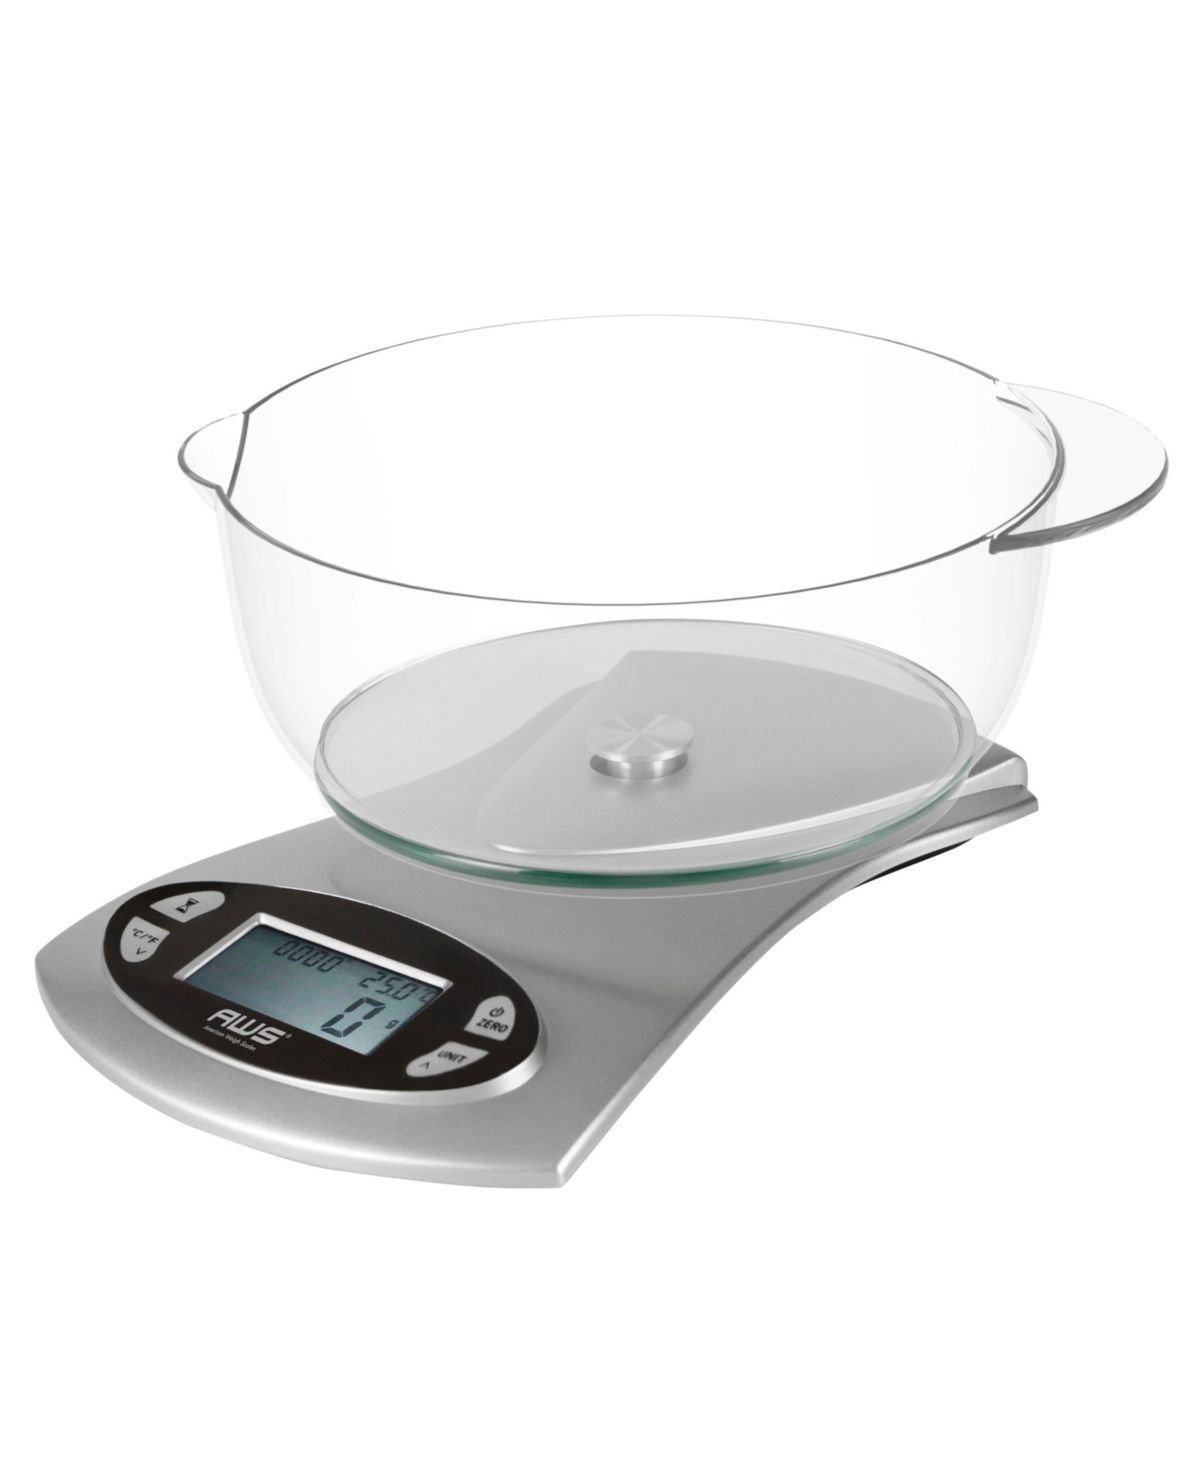 American Weigh Scales Digital Scale with Bowl | Macys (US)